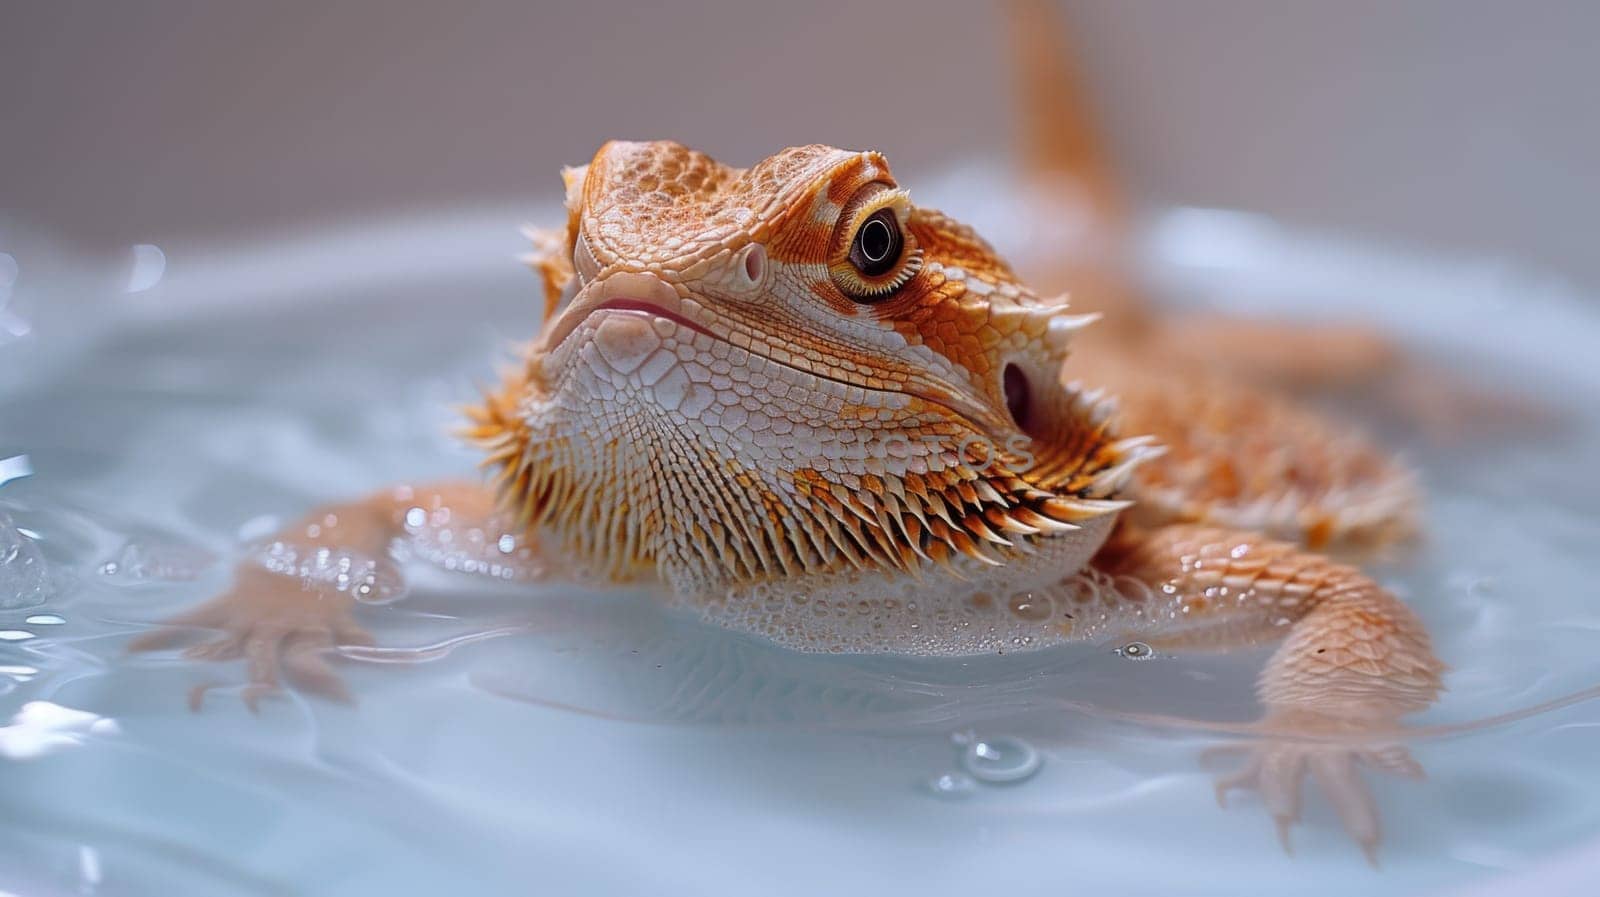 A bearded lizard is in a tub of water with bubbles, AI by starush